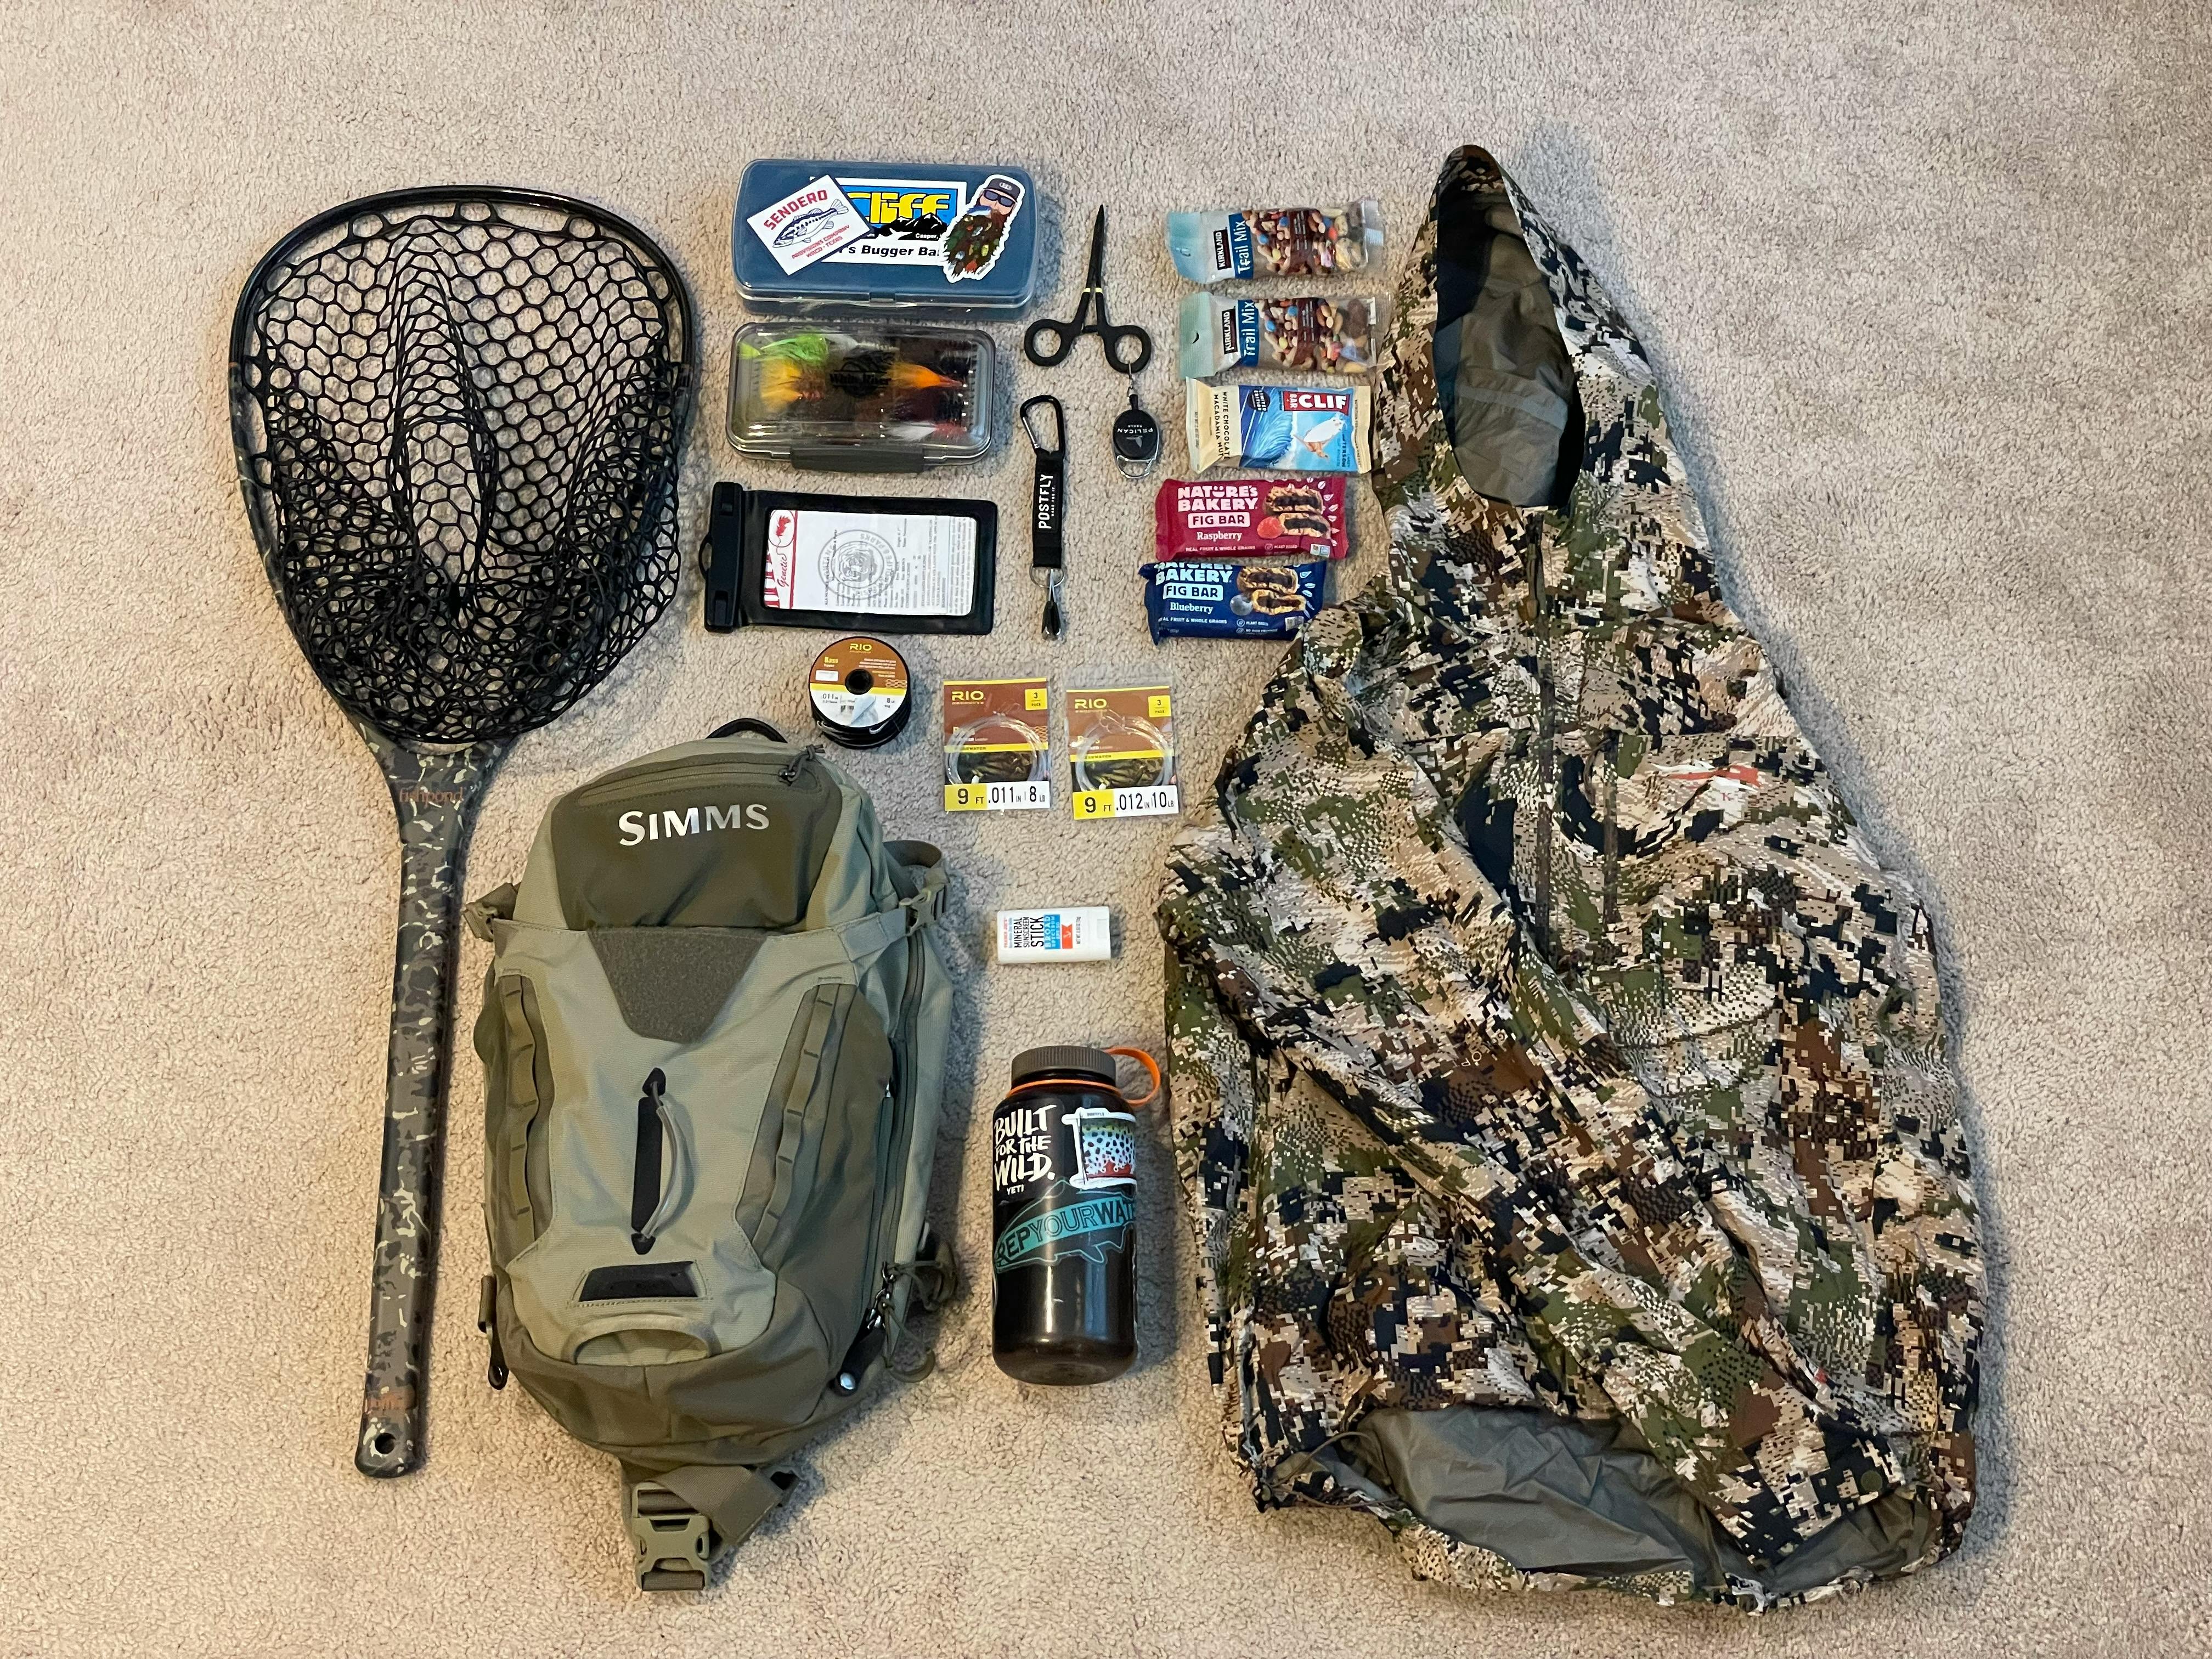 The author has laid out his pack, his net, a camp jacket, a water bottle, tools, tippet, snacks, and more on a carpet.